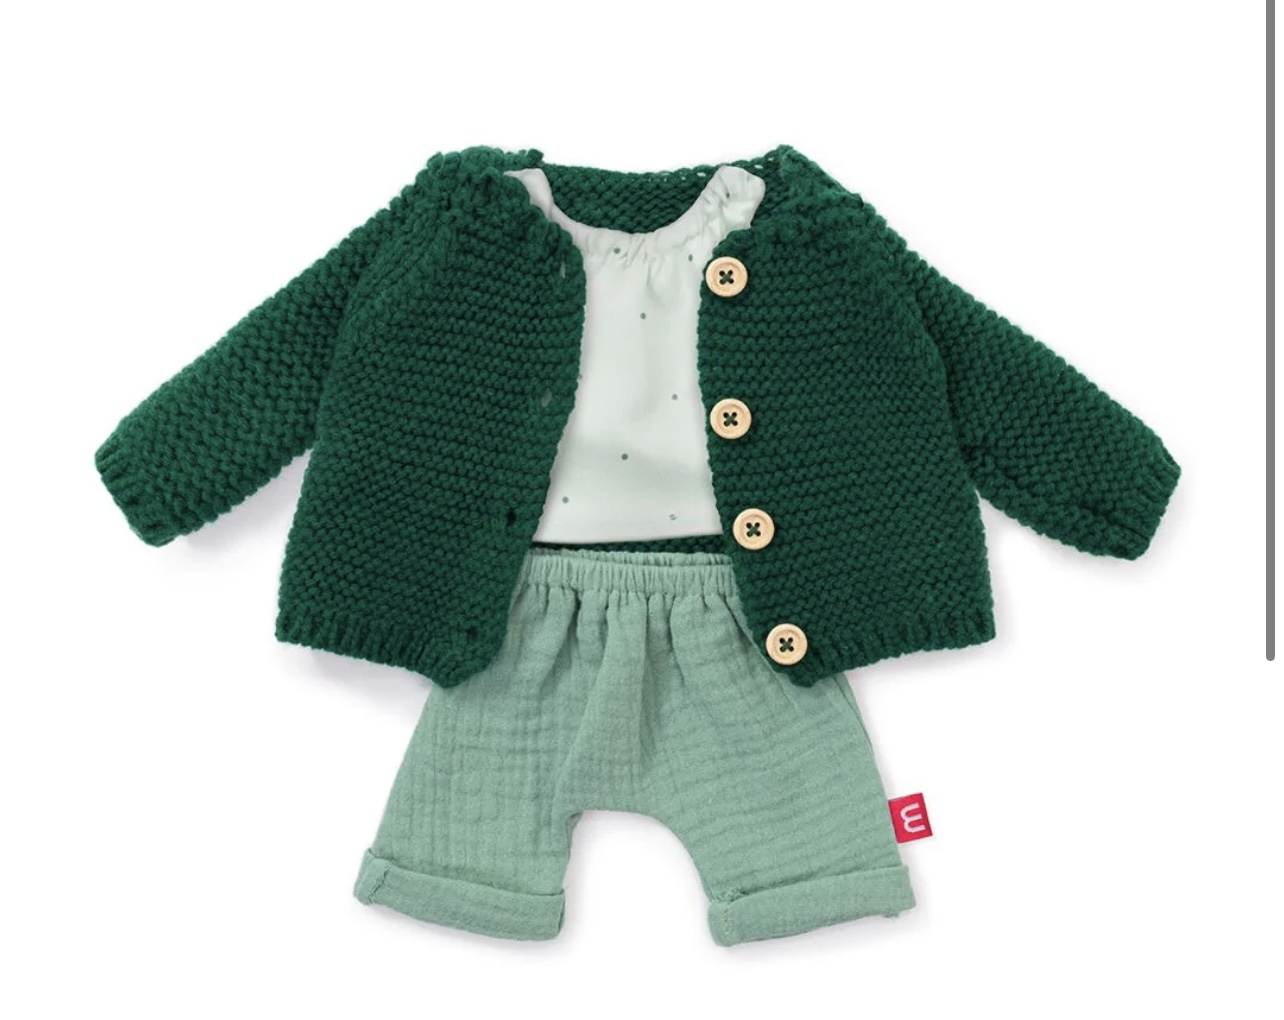 Doll clothes- $39